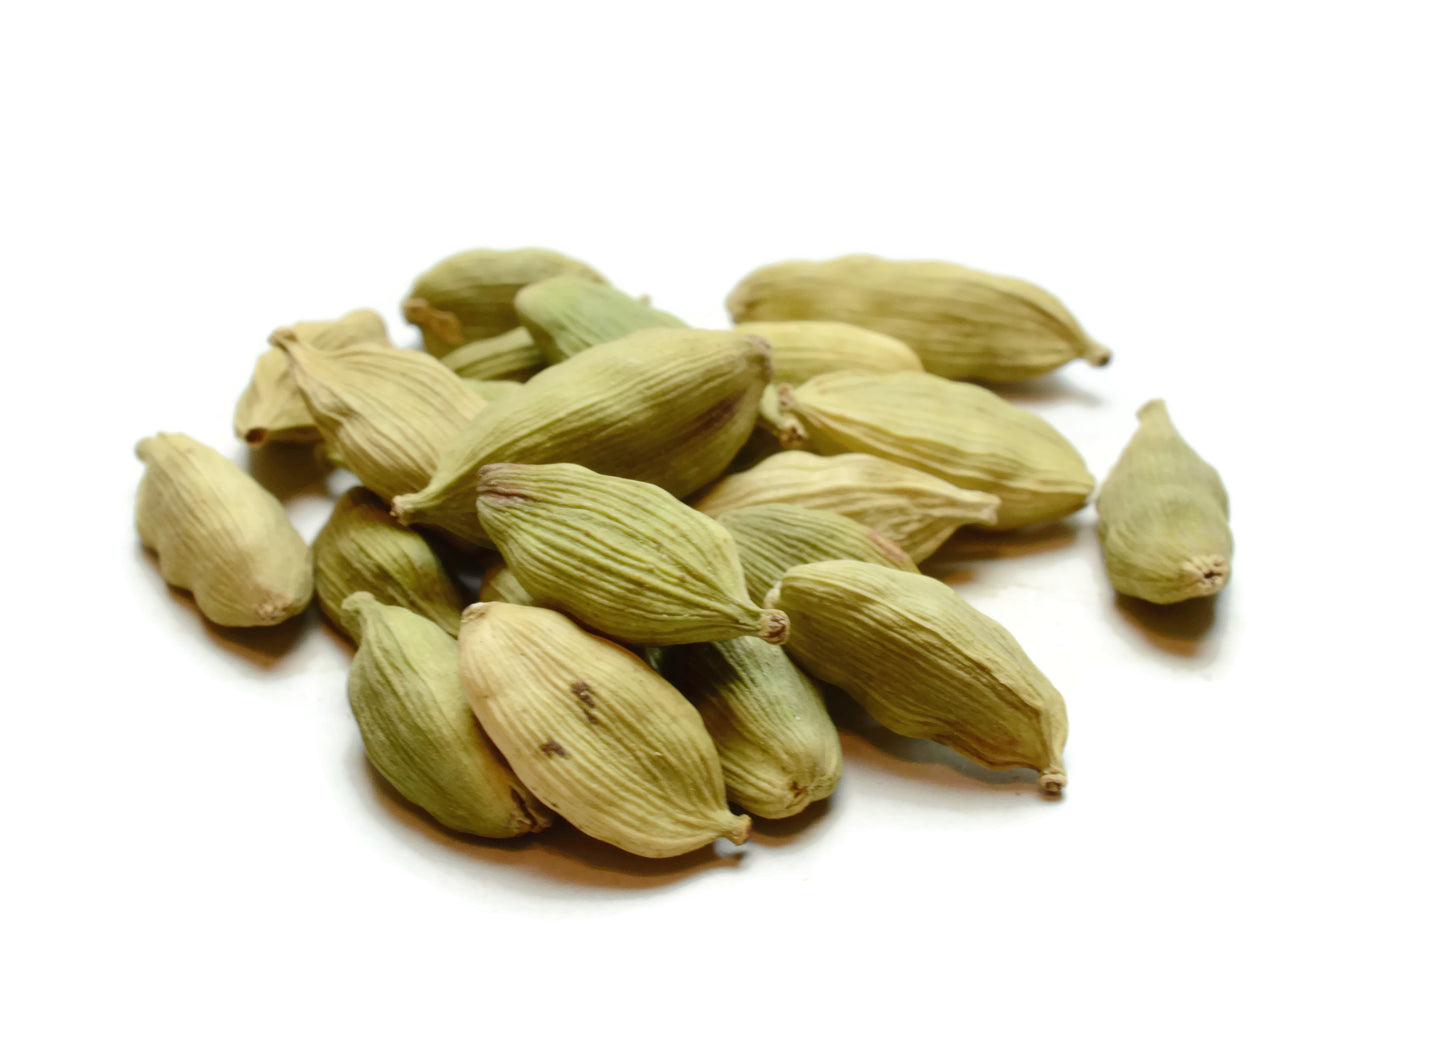 Premium Whole Green Cardamom: Fragrant Spice for Exquisite Culinary Creations